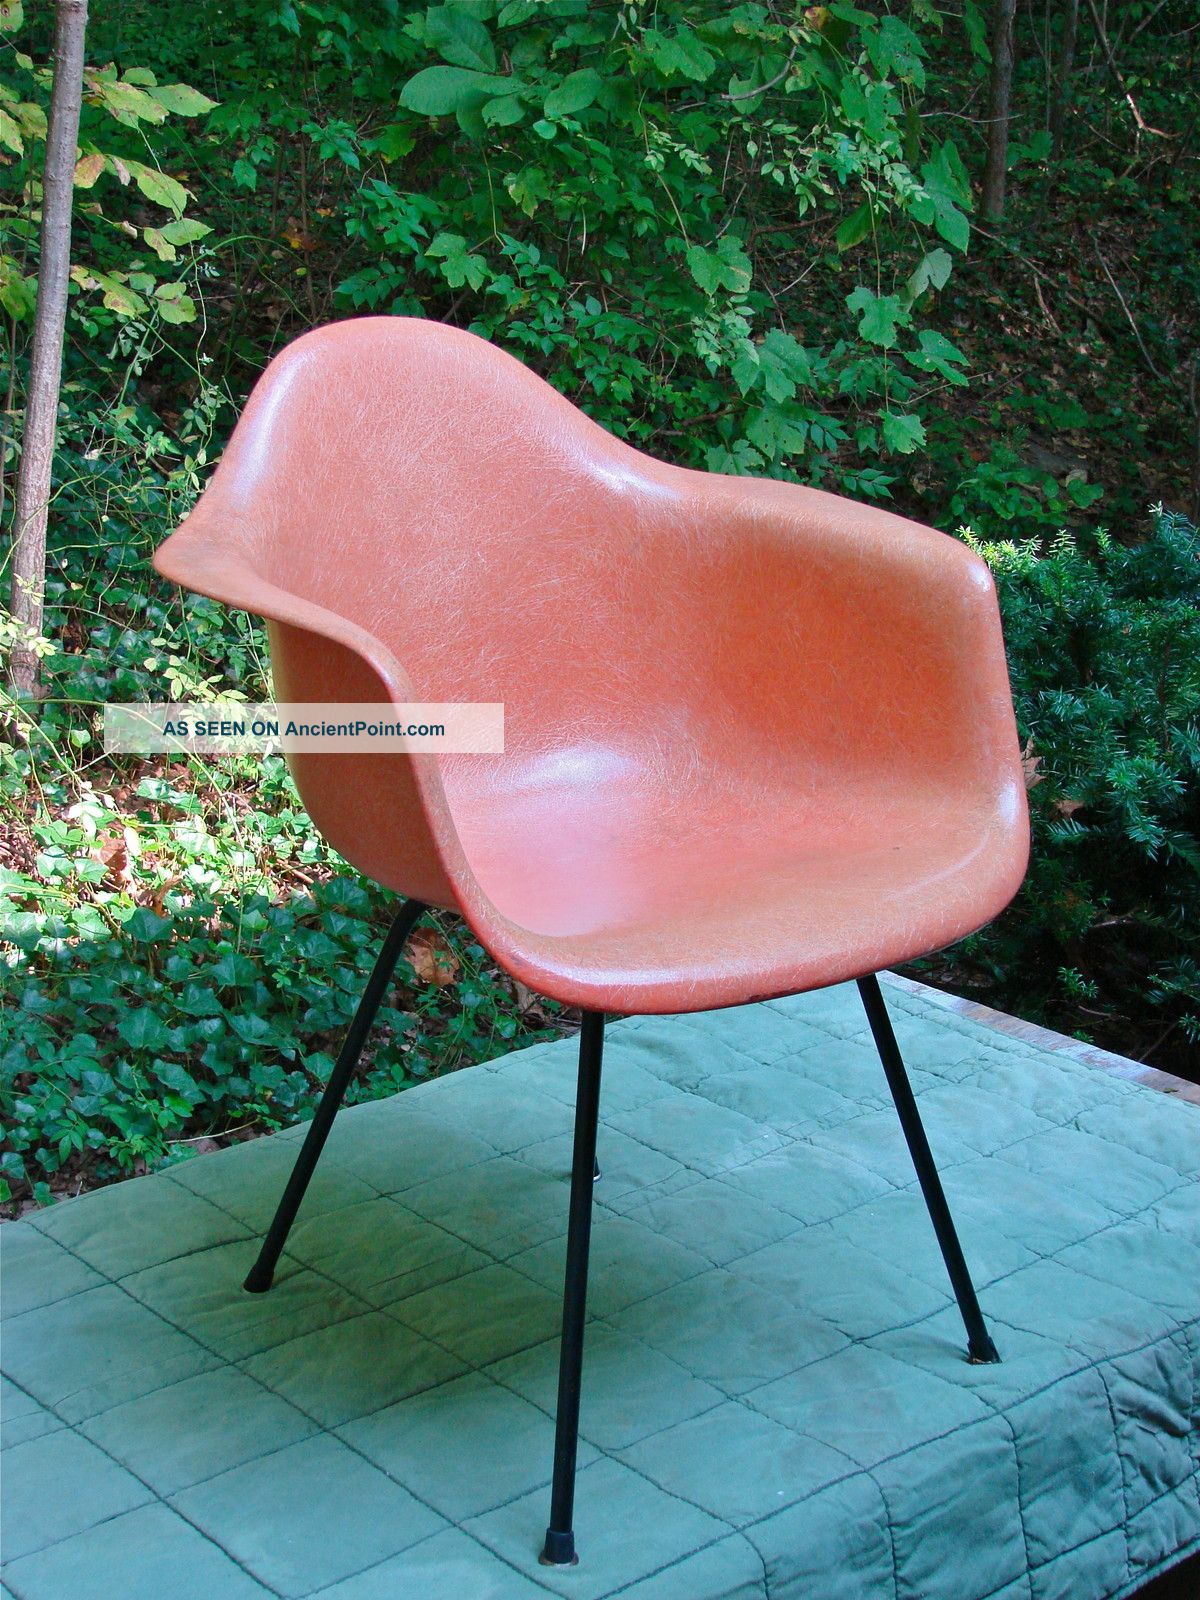 Eames Miller Early Zenith Arm Shell Dax Chair,  Salmon Orange,  Mid - Century Orig. Post-1950 photo